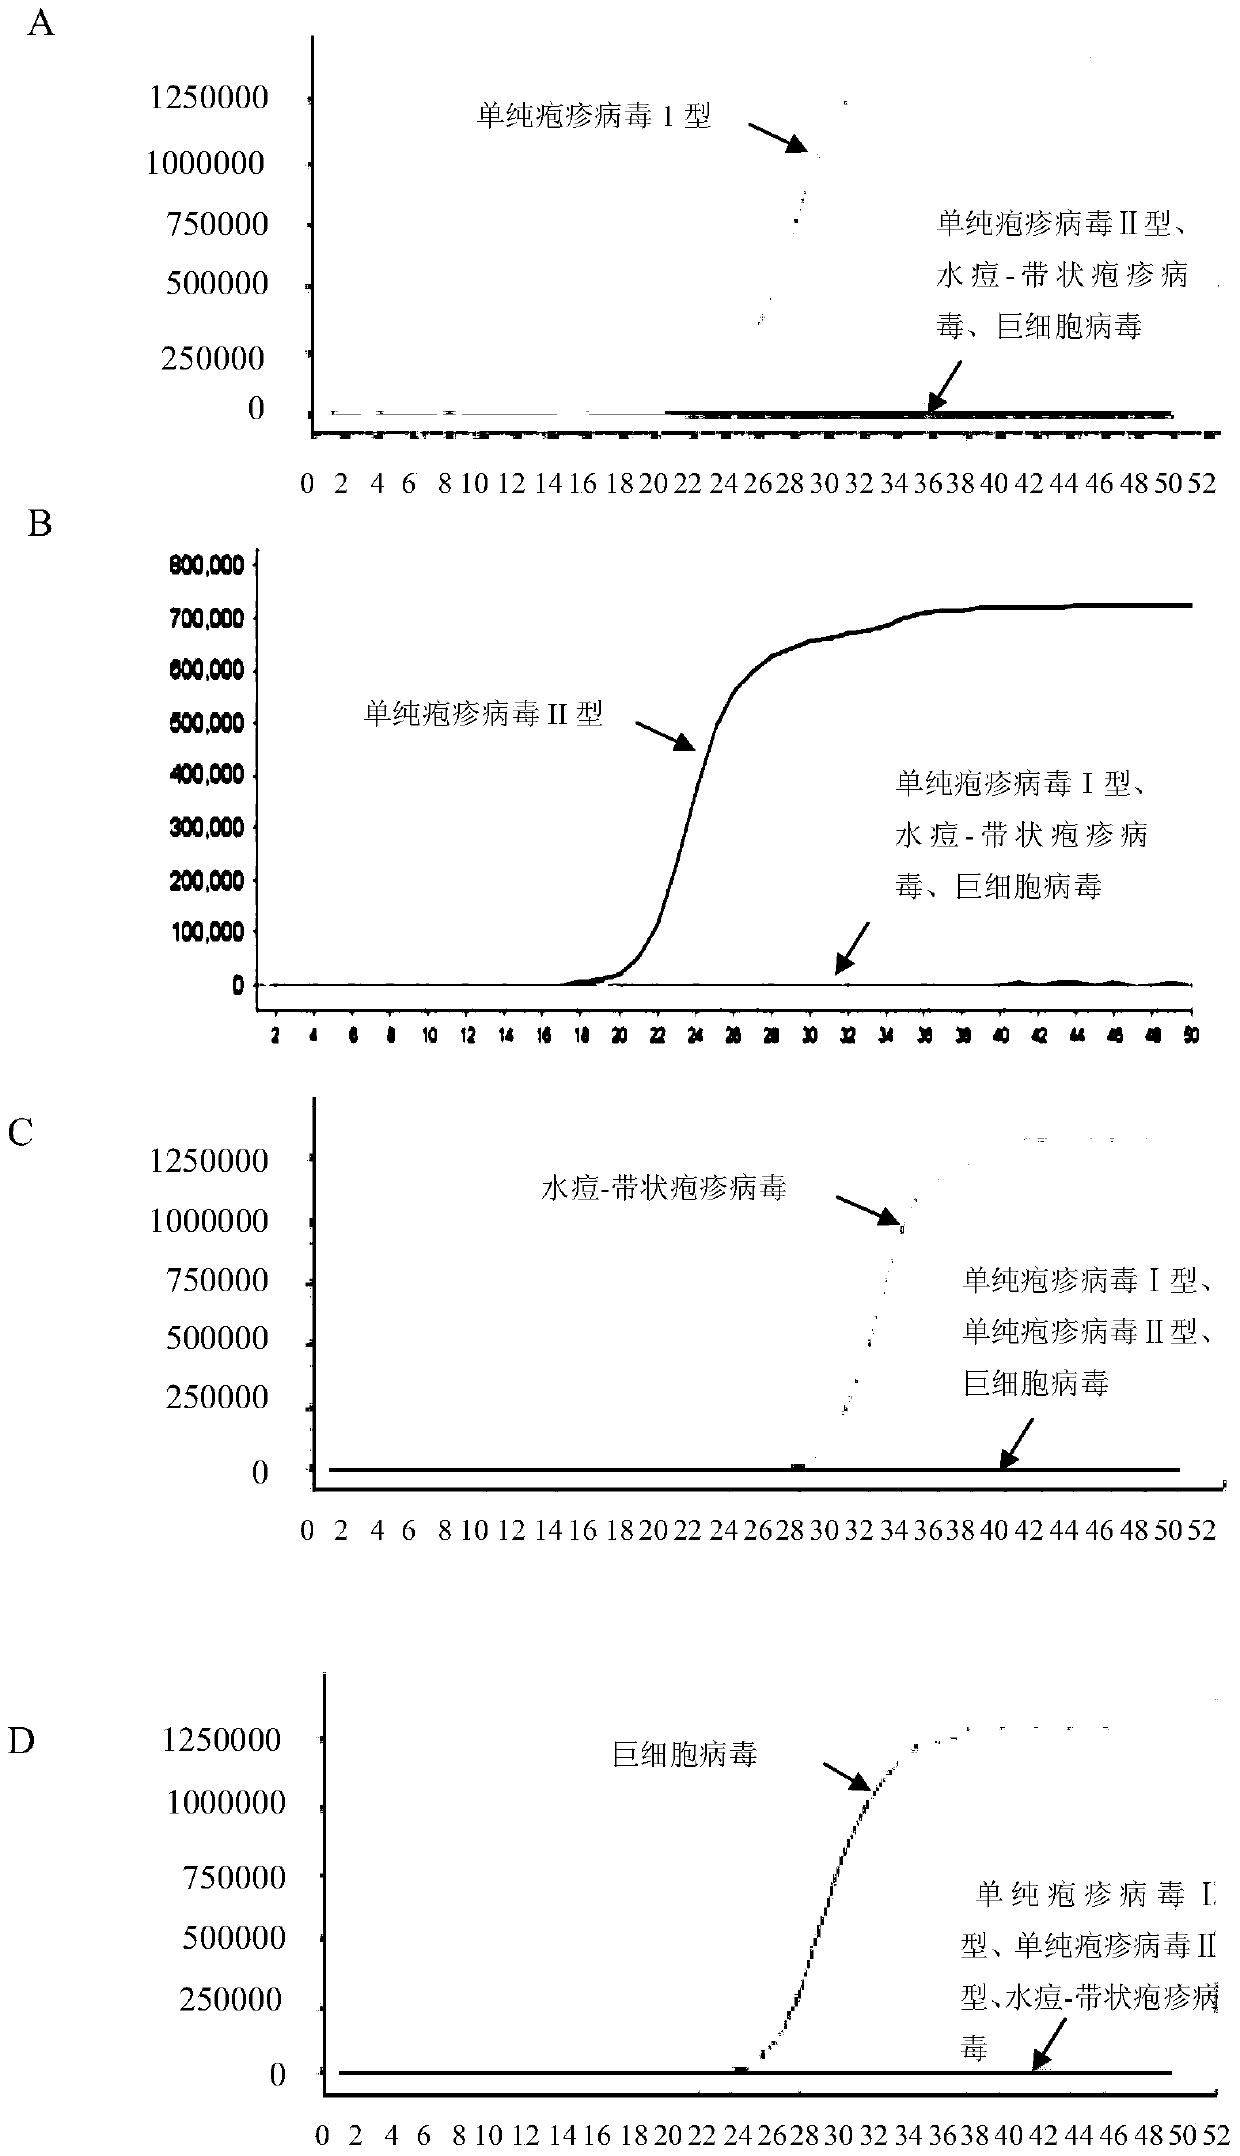 Combination and application of lamp primers for detection of 4 ophthalmic infection viruses